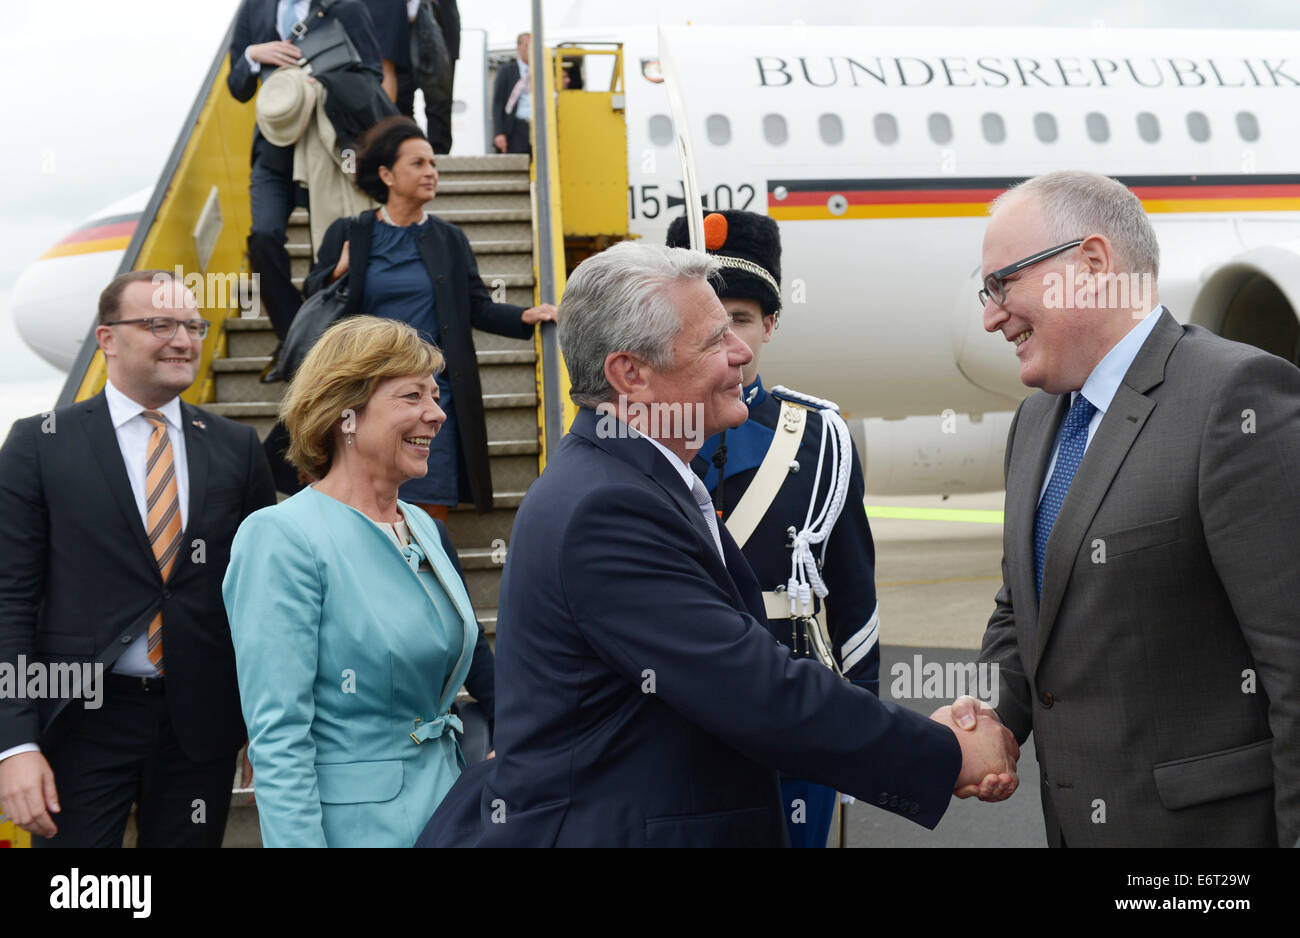 Maastricht, Germany. 30th Aug, 2014. German President Joachim Gauck (C) and his partner Daniela Schadt alight from a government plane and are welcomed by Dutch Foreign Minister Frans Timmermanns at Maastricht-Aachen Airport in Maastricht, Germany, 30 August 2014. The attend the festivities on the occasion of the 200th jubilee of the Kingdom of the Netherlands. Photo: RAINER JENSEN/DPA/Alamy Live News Stock Photo